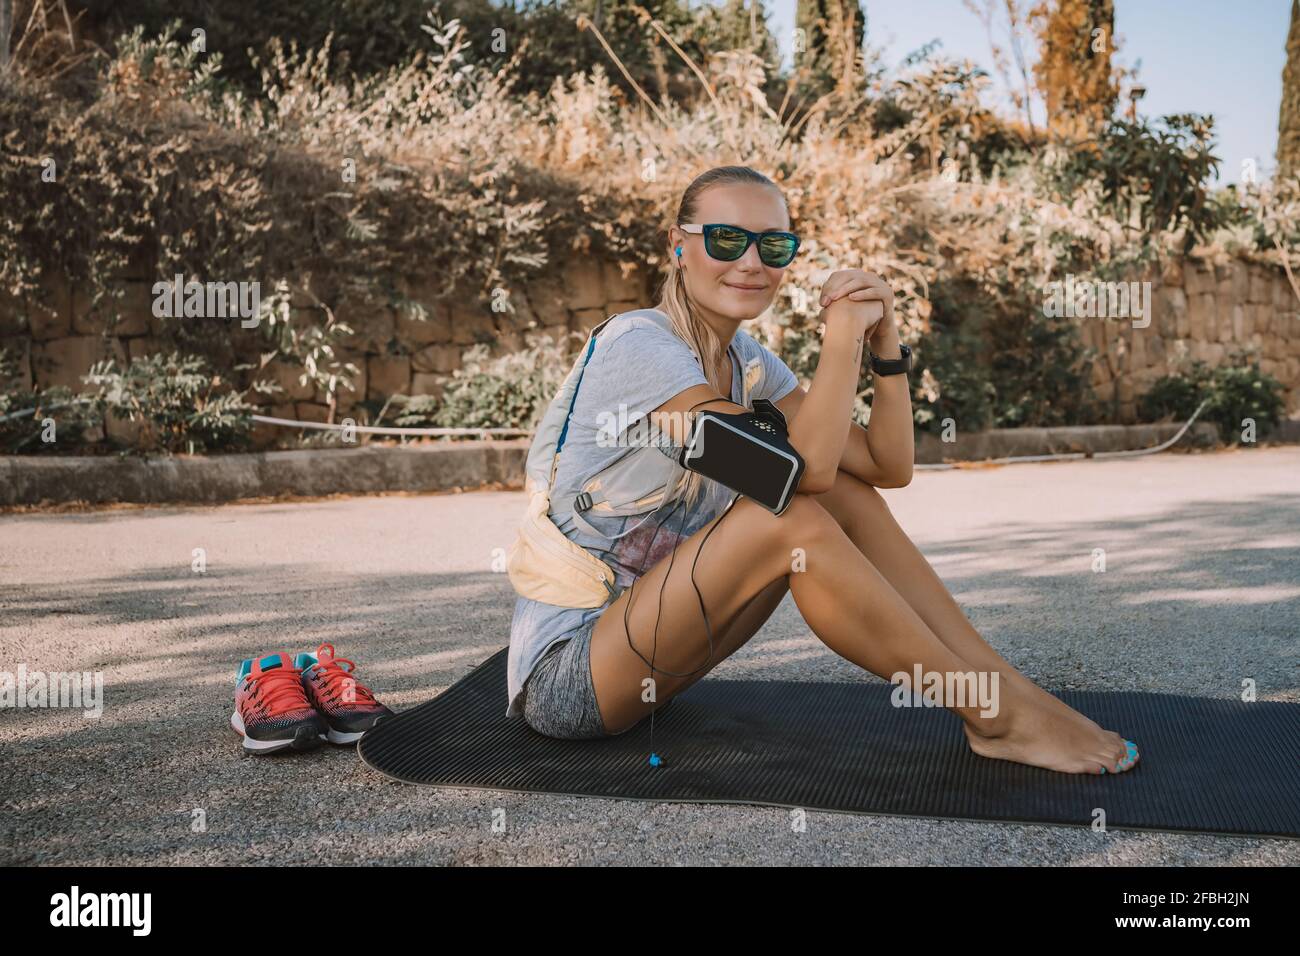 Sportive Woman Resting on the Mat in the Park after Workout. Enjoying Outdoors Sport. Energy Life. Healthy Lifestyle. Stock Photo